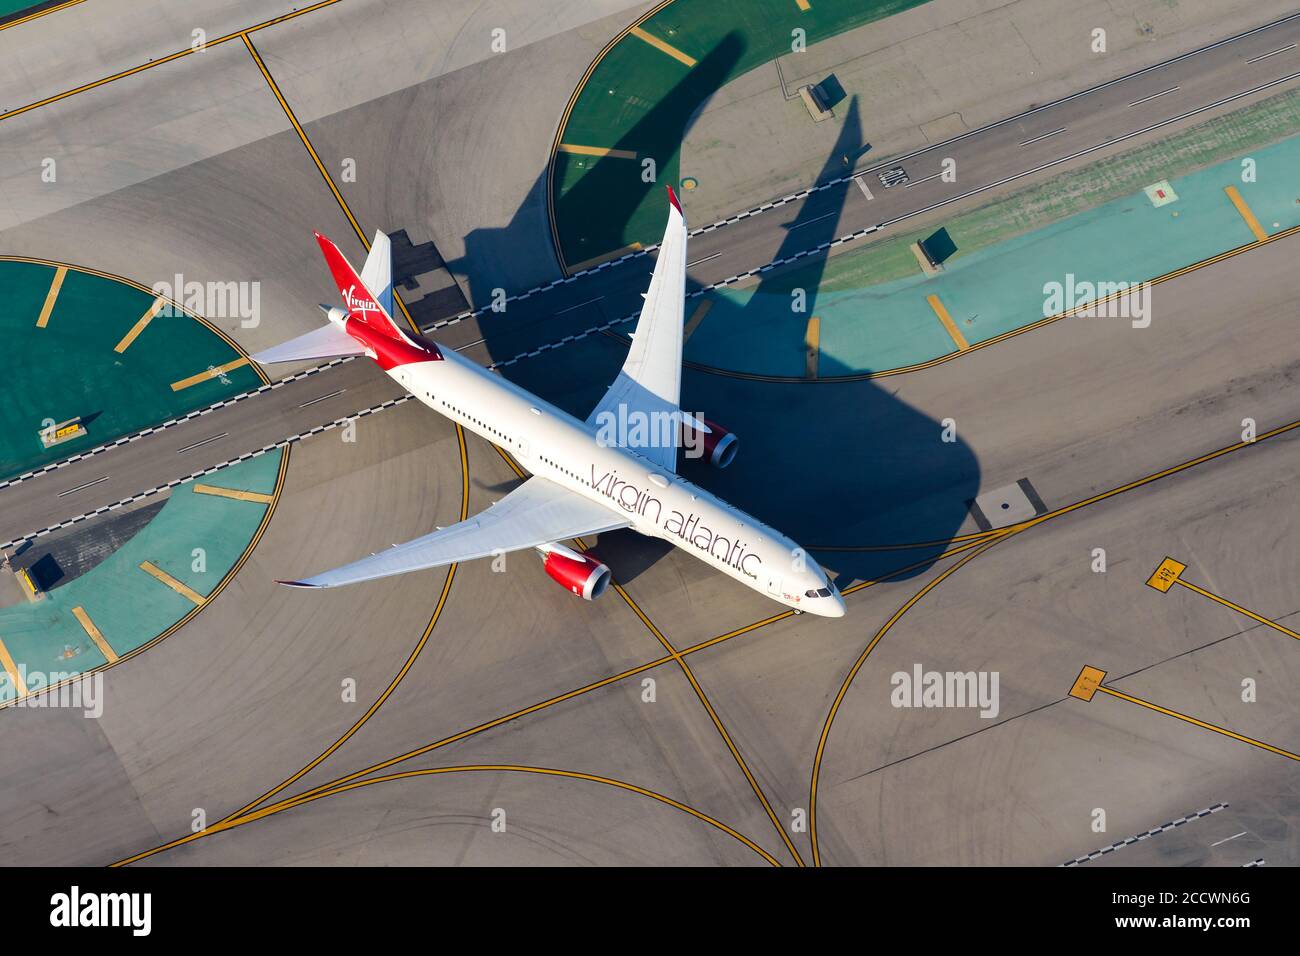 Virgin Atlantic Boeing 787 Dreamliner taxiing at KLAX Airport, USA. Aircraft 787-9 aerial view. Airline from United Kingdom. Taxiway lines. Stock Photo